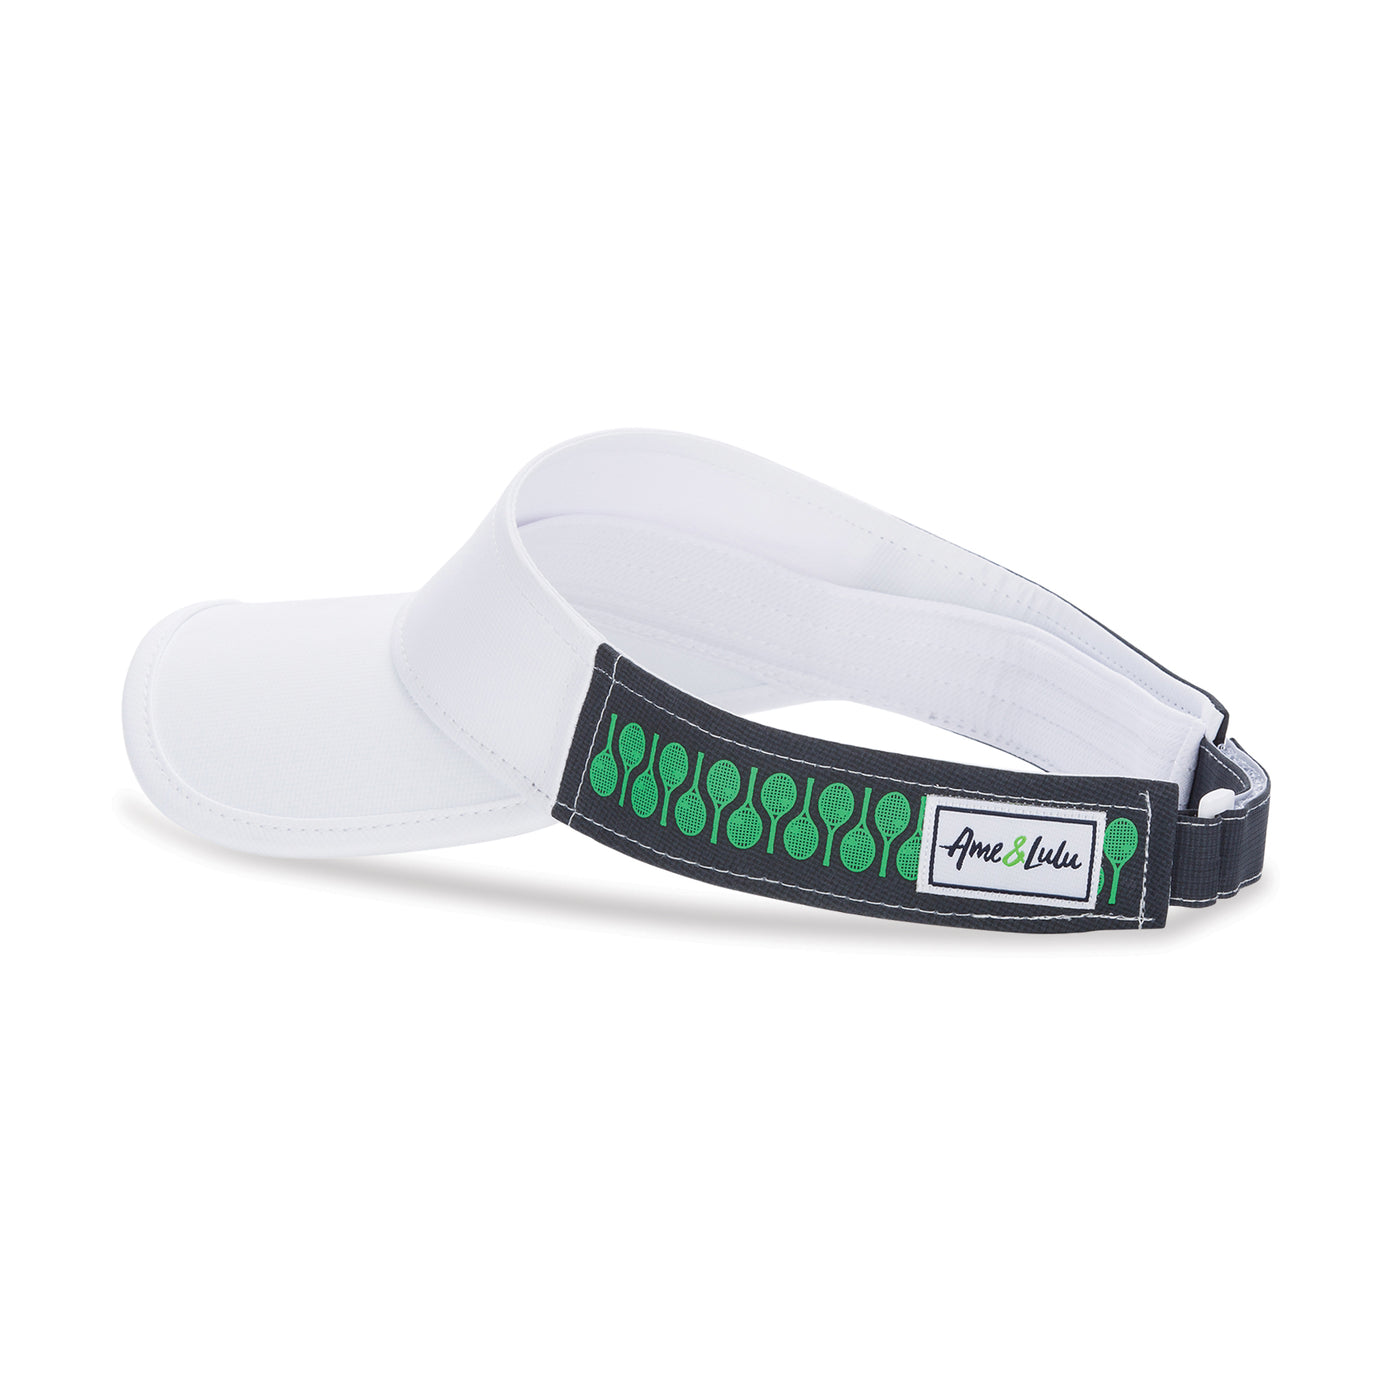 Side view of Racquets Head in the game visor. Front of visor is white and the sides are navy with green racquets printed on the navy.